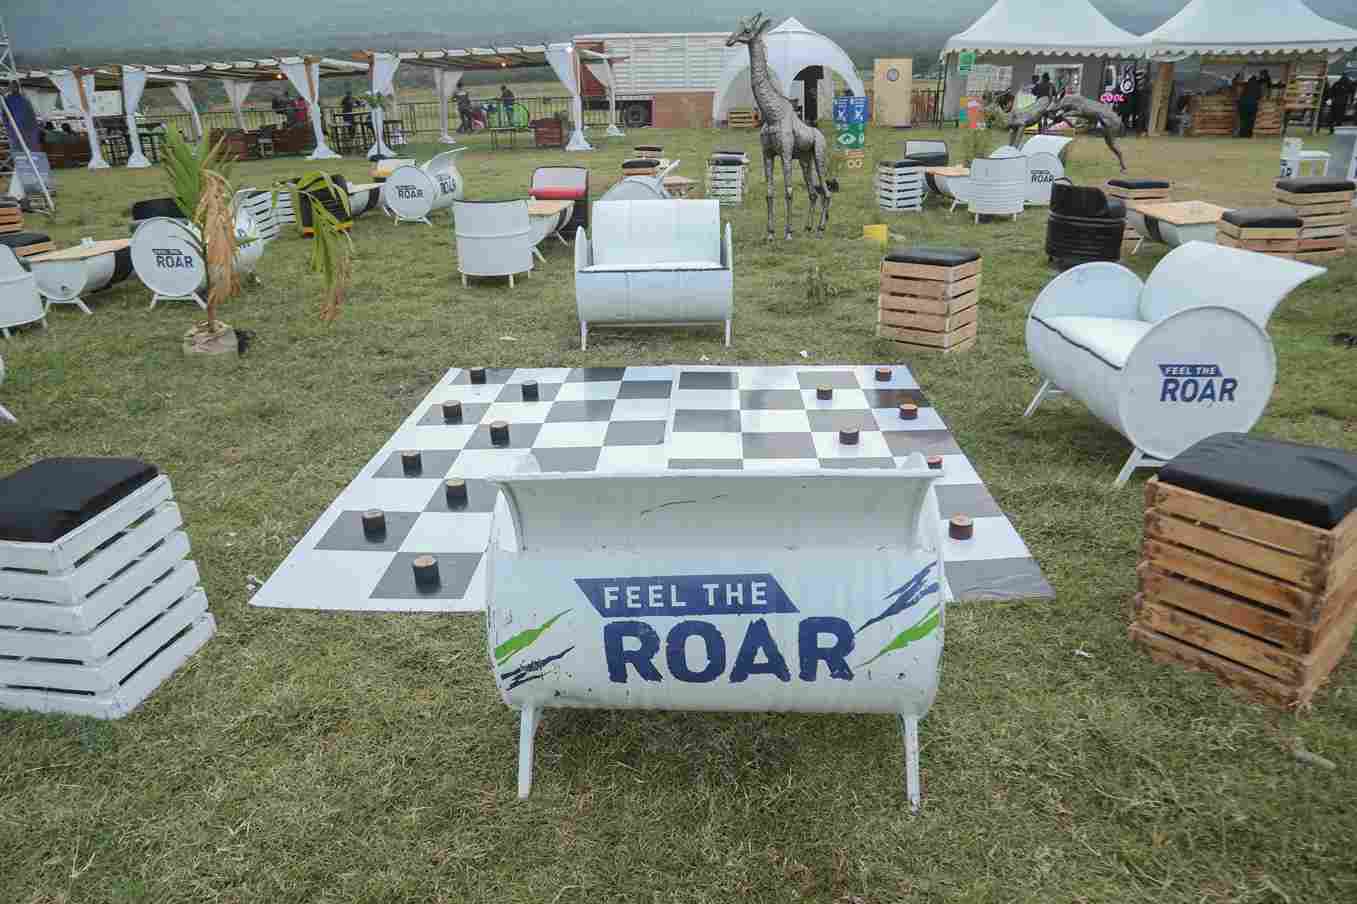 Showcasing sustainability at the 2023 WRC held in Soysambu, Naivasha; KCB tent with repurposed furniture and animal artifacts made from recycled metal, embracing the astonishing beauty of waste transformation.